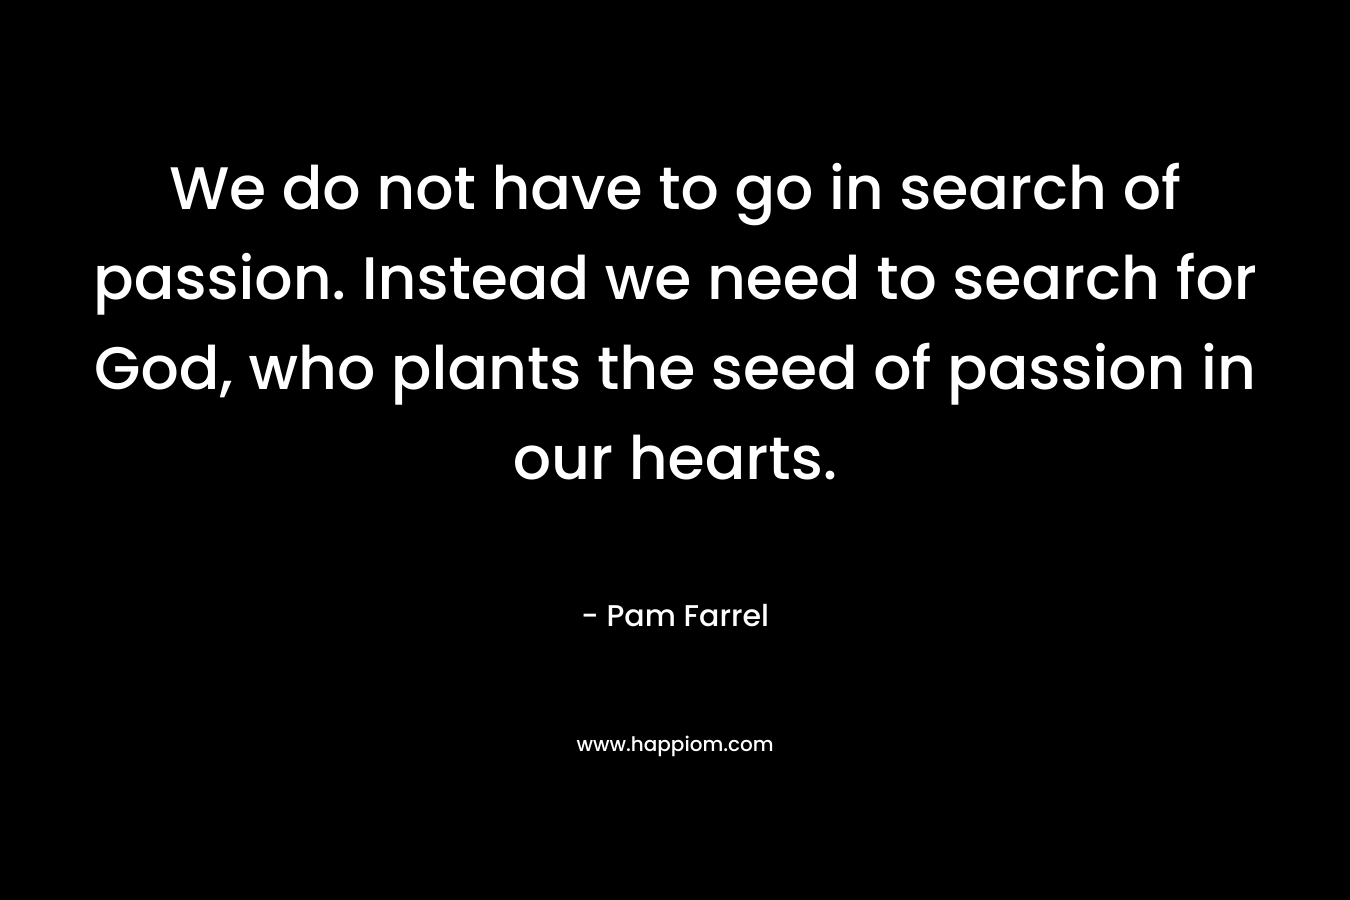 We do not have to go in search of passion. Instead we need to search for God, who plants the seed of passion in our hearts.